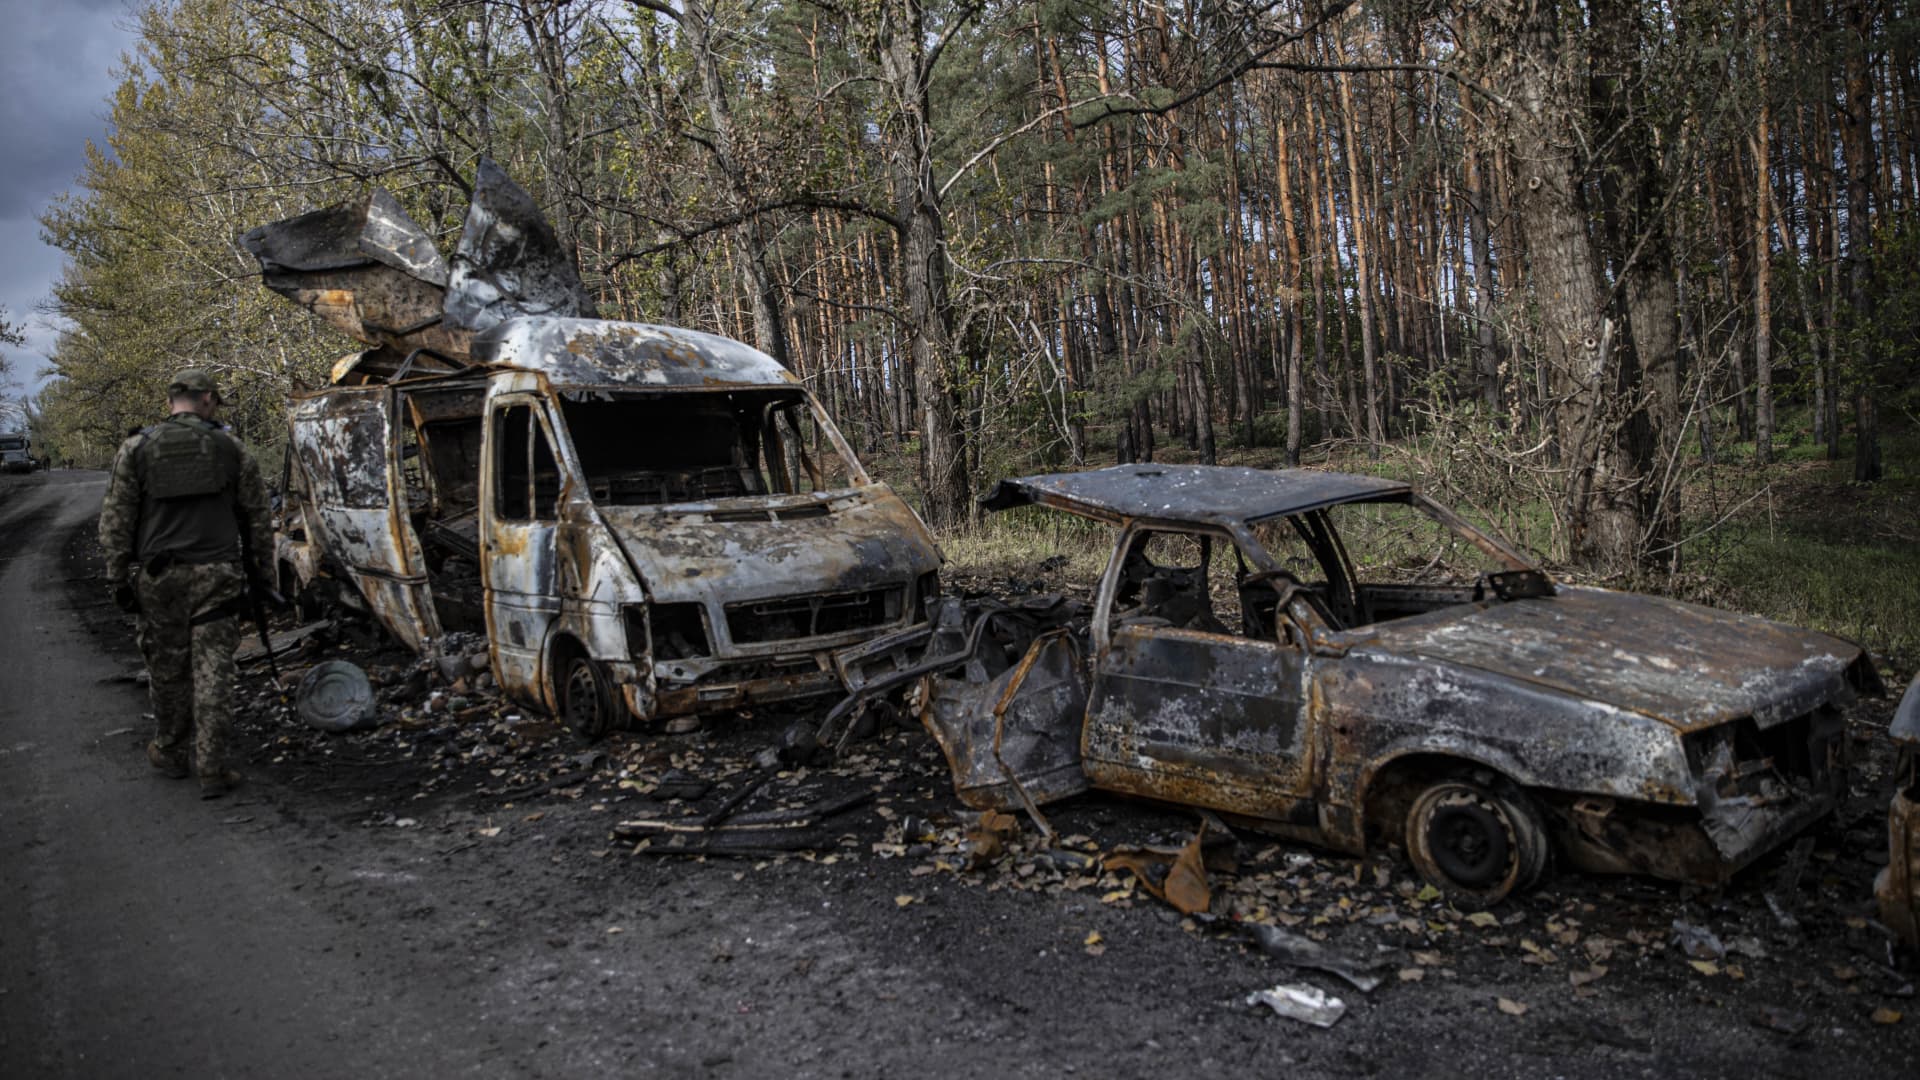 A view of damaged cars after Russian forces withdrawn from the city of Lyman in the Donetsk region (Donetsk Oblast), Ukraine on October 05, 202.